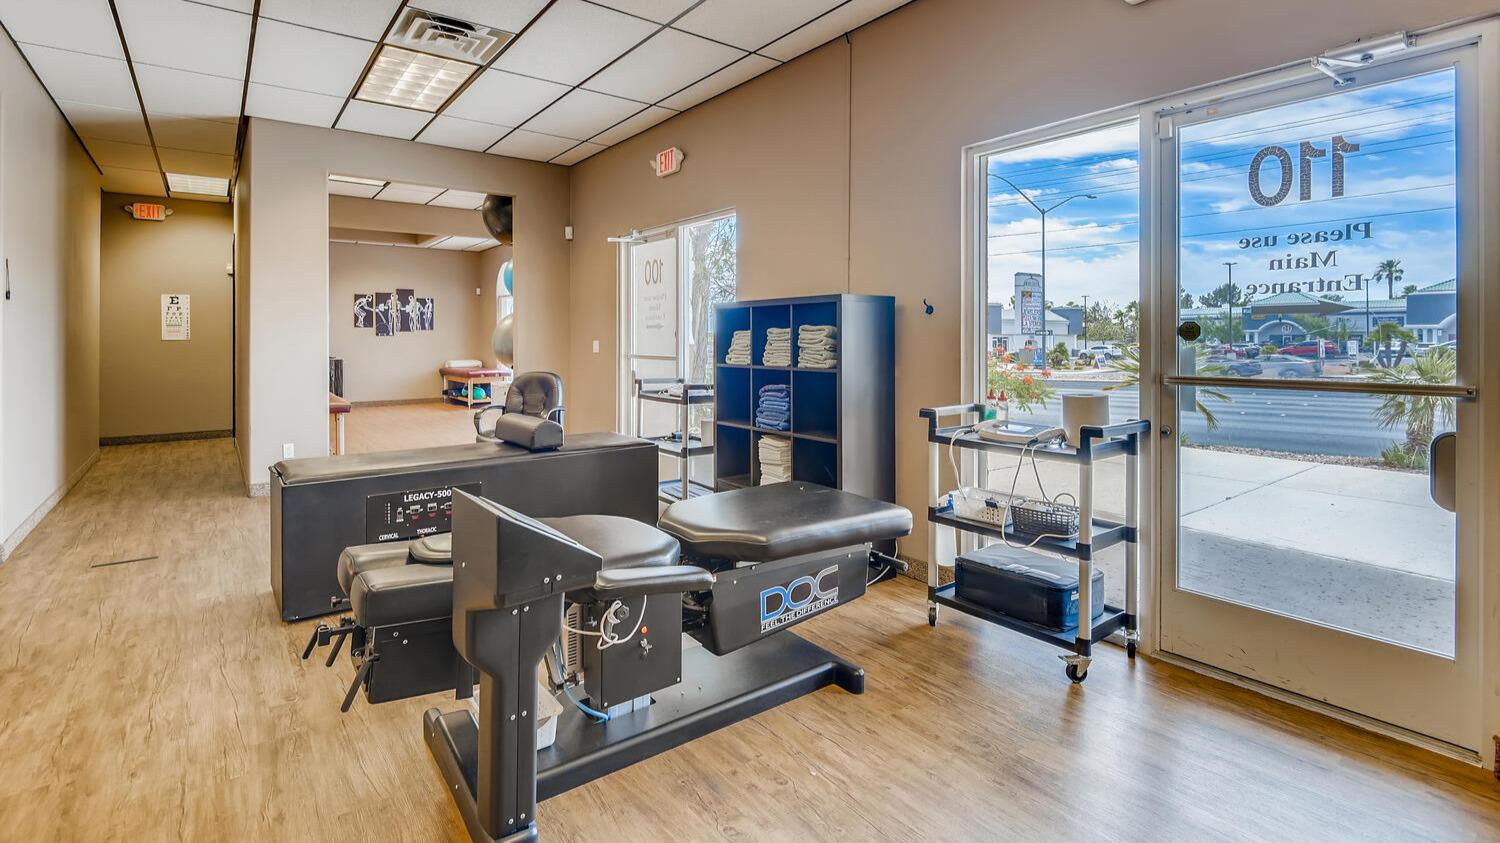 Spinal Decompression Treatment is a type of traction therapy that involves stretching of the spine, using a traction table to relieve back and/or leg pain.